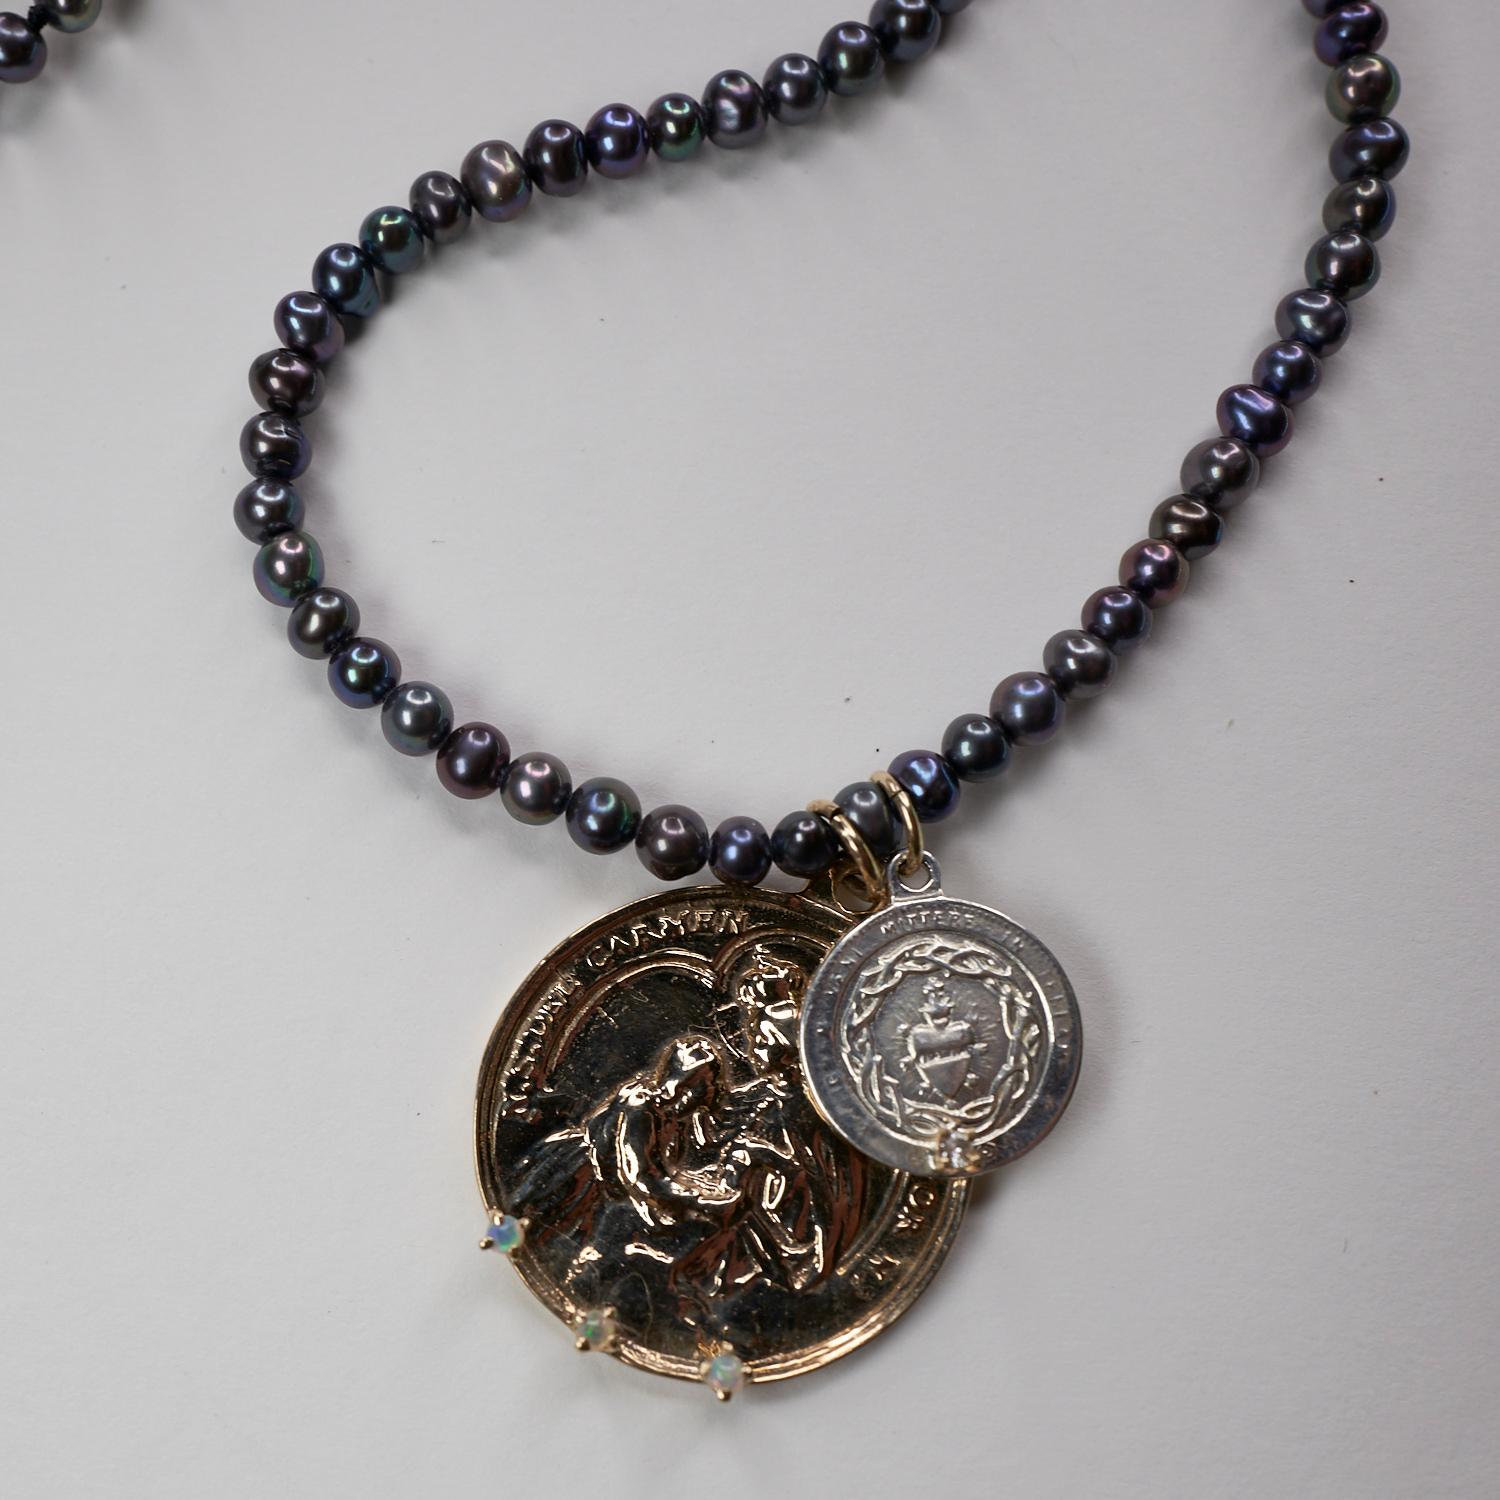 Two Medal Pendants, One Small Silver Coin with White Diamond and a Bronze Coin set with 3 Opals, Hanging on a Black Pearl Bead Necklace, One of a kind,  16